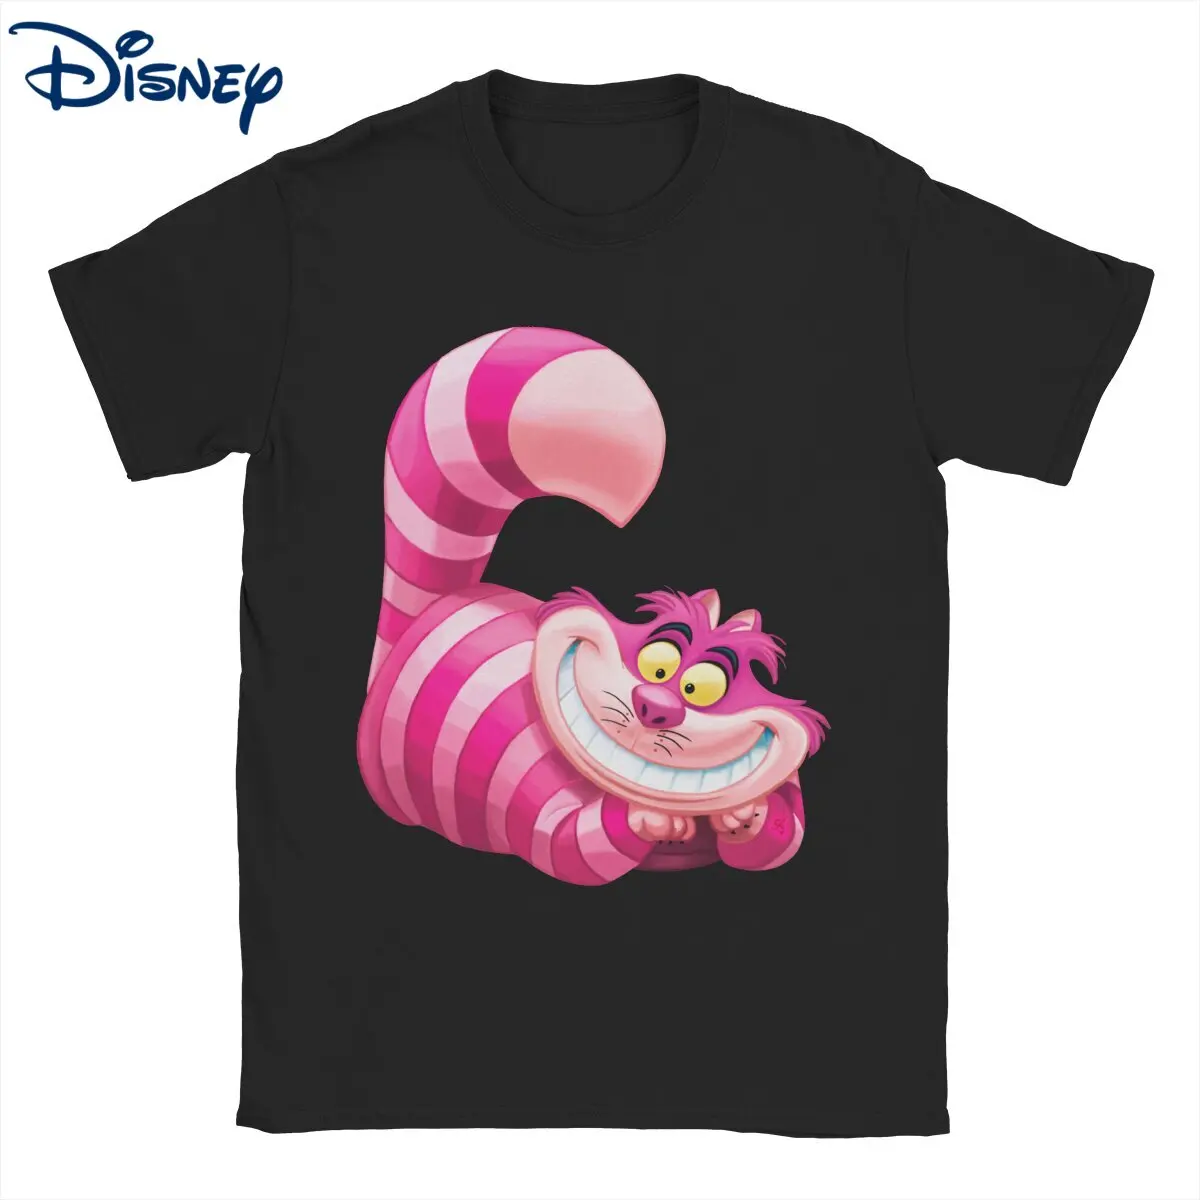 

Disney And the momeraths outgrabe T Shirts Alice in Wonderland Cheshire Cat T-Shirt Men Pure Cotton Tees 4XL 5XL 6XL Clothes